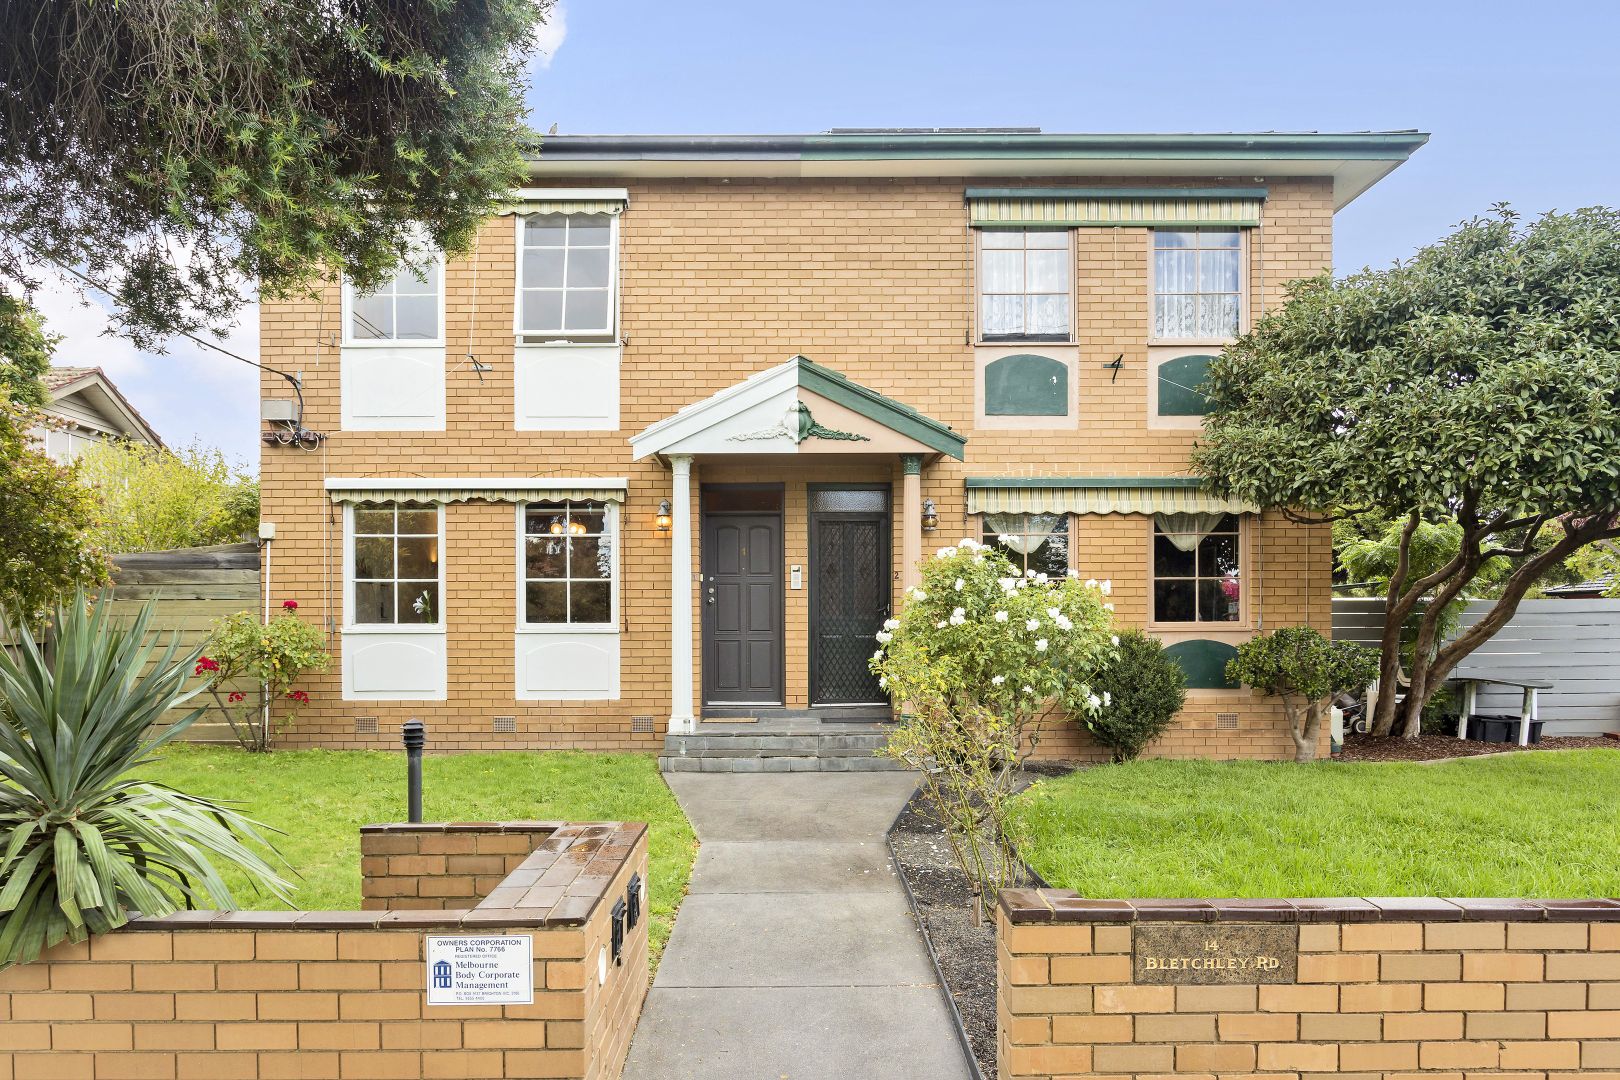 1/14 Bletchley Road, Hughesdale VIC 3166